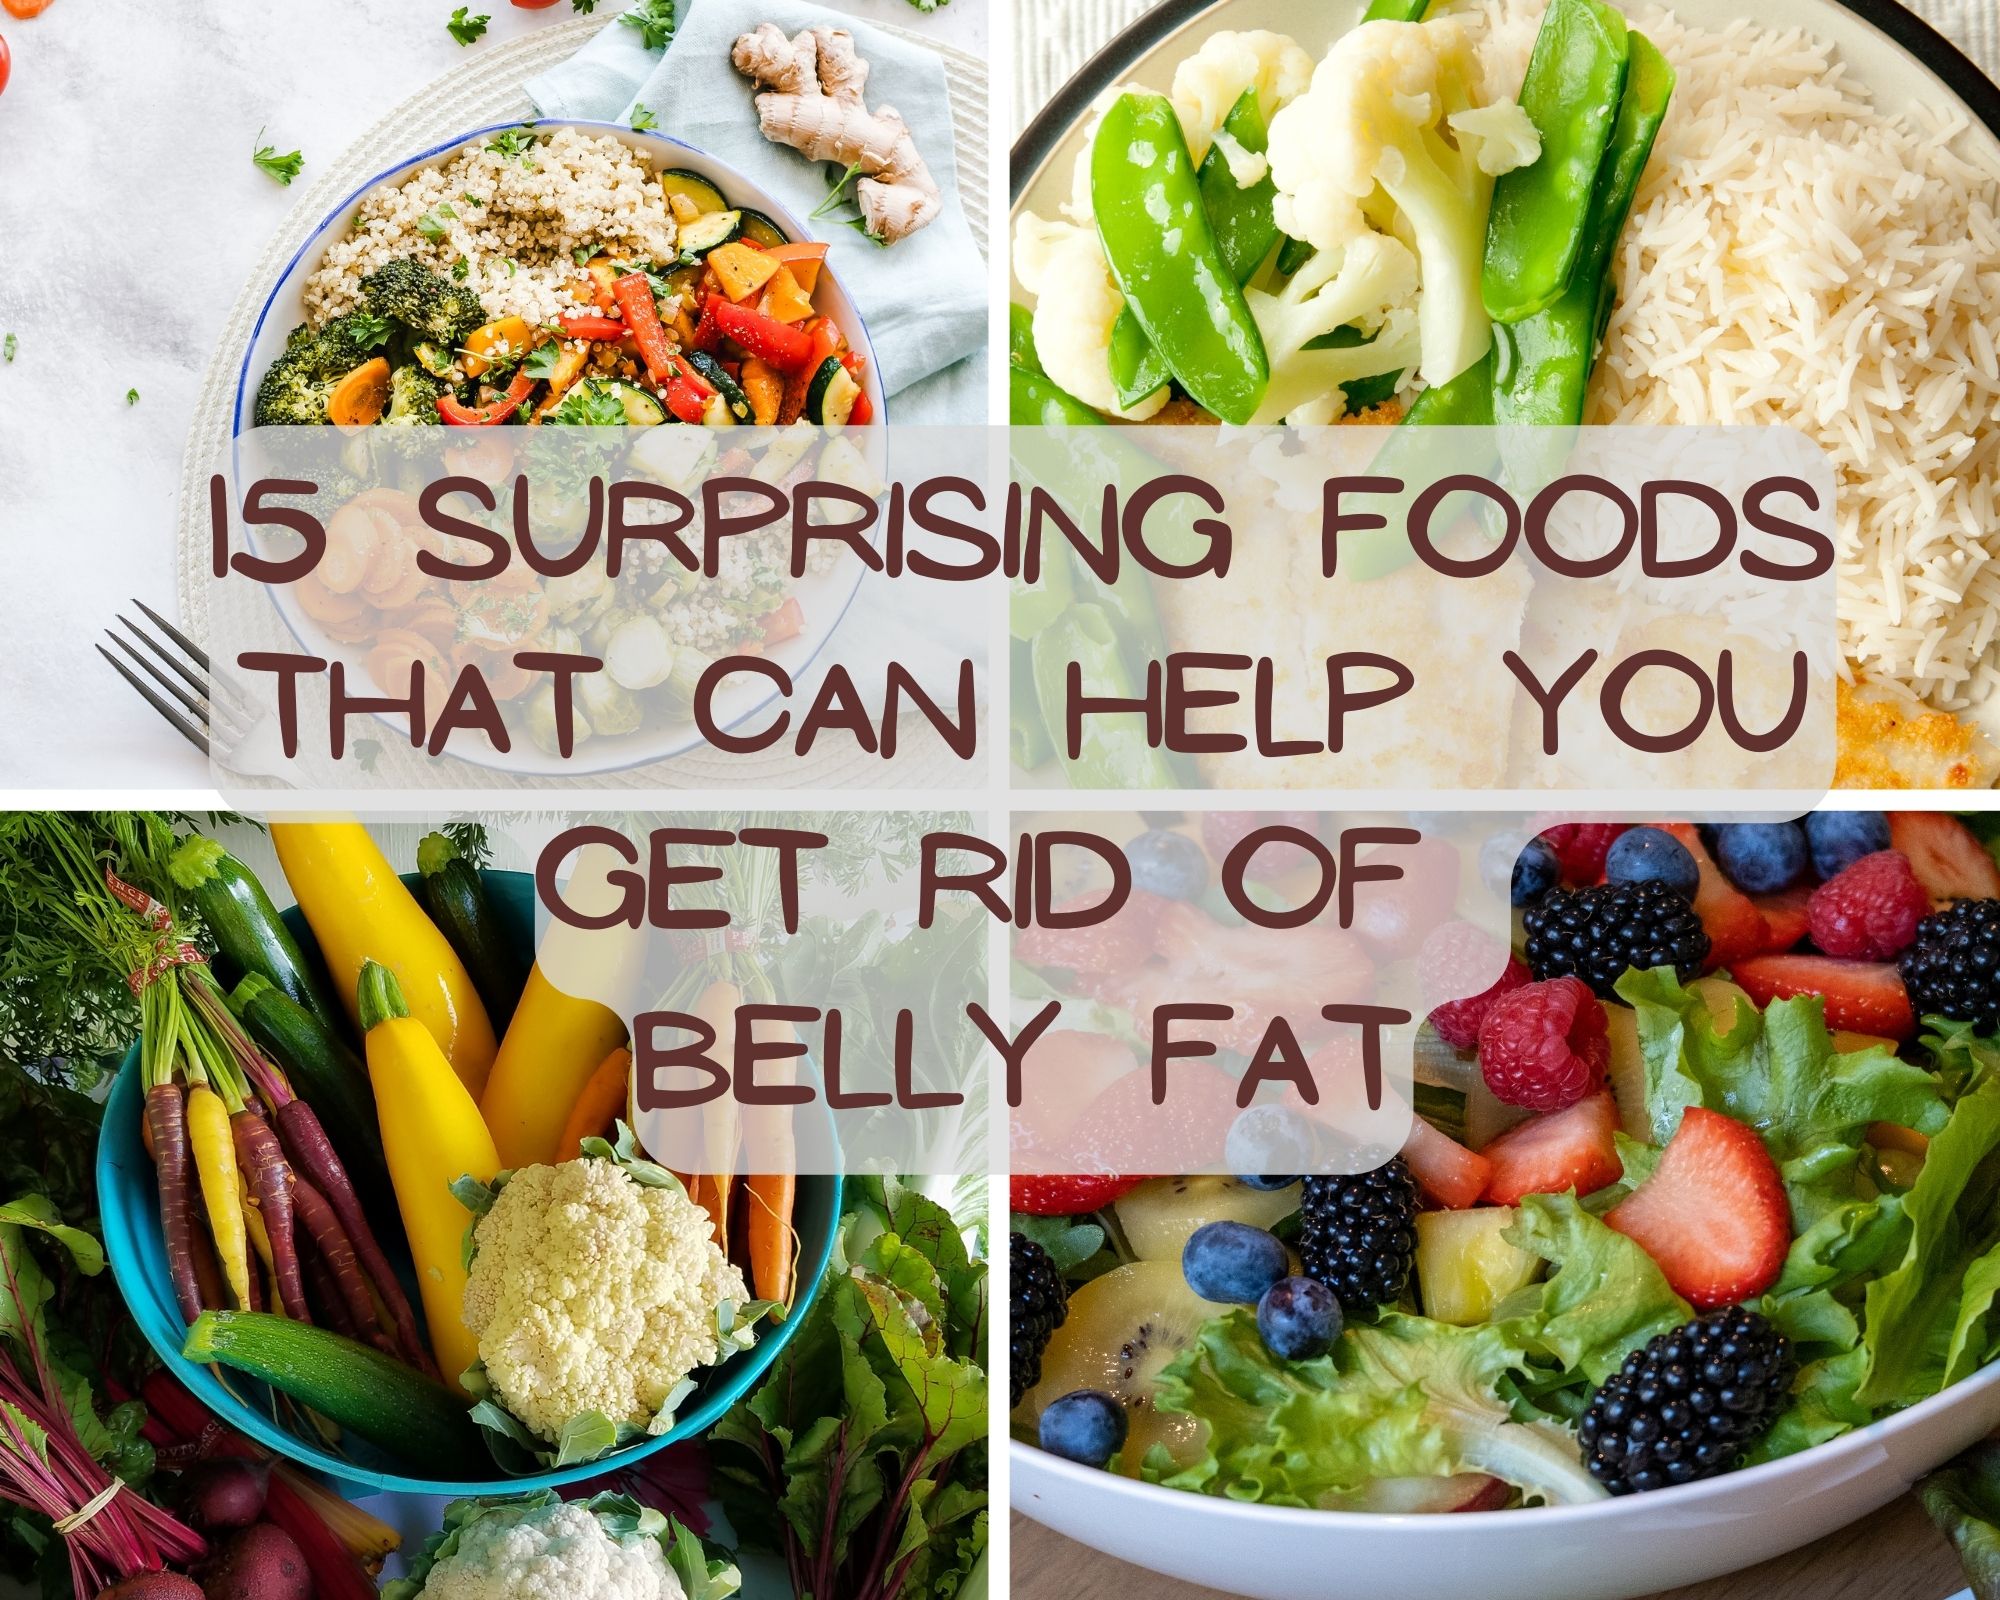 Read more about the article 15 Surprising Foods That Can Help You Get Rid of Belly Fat.